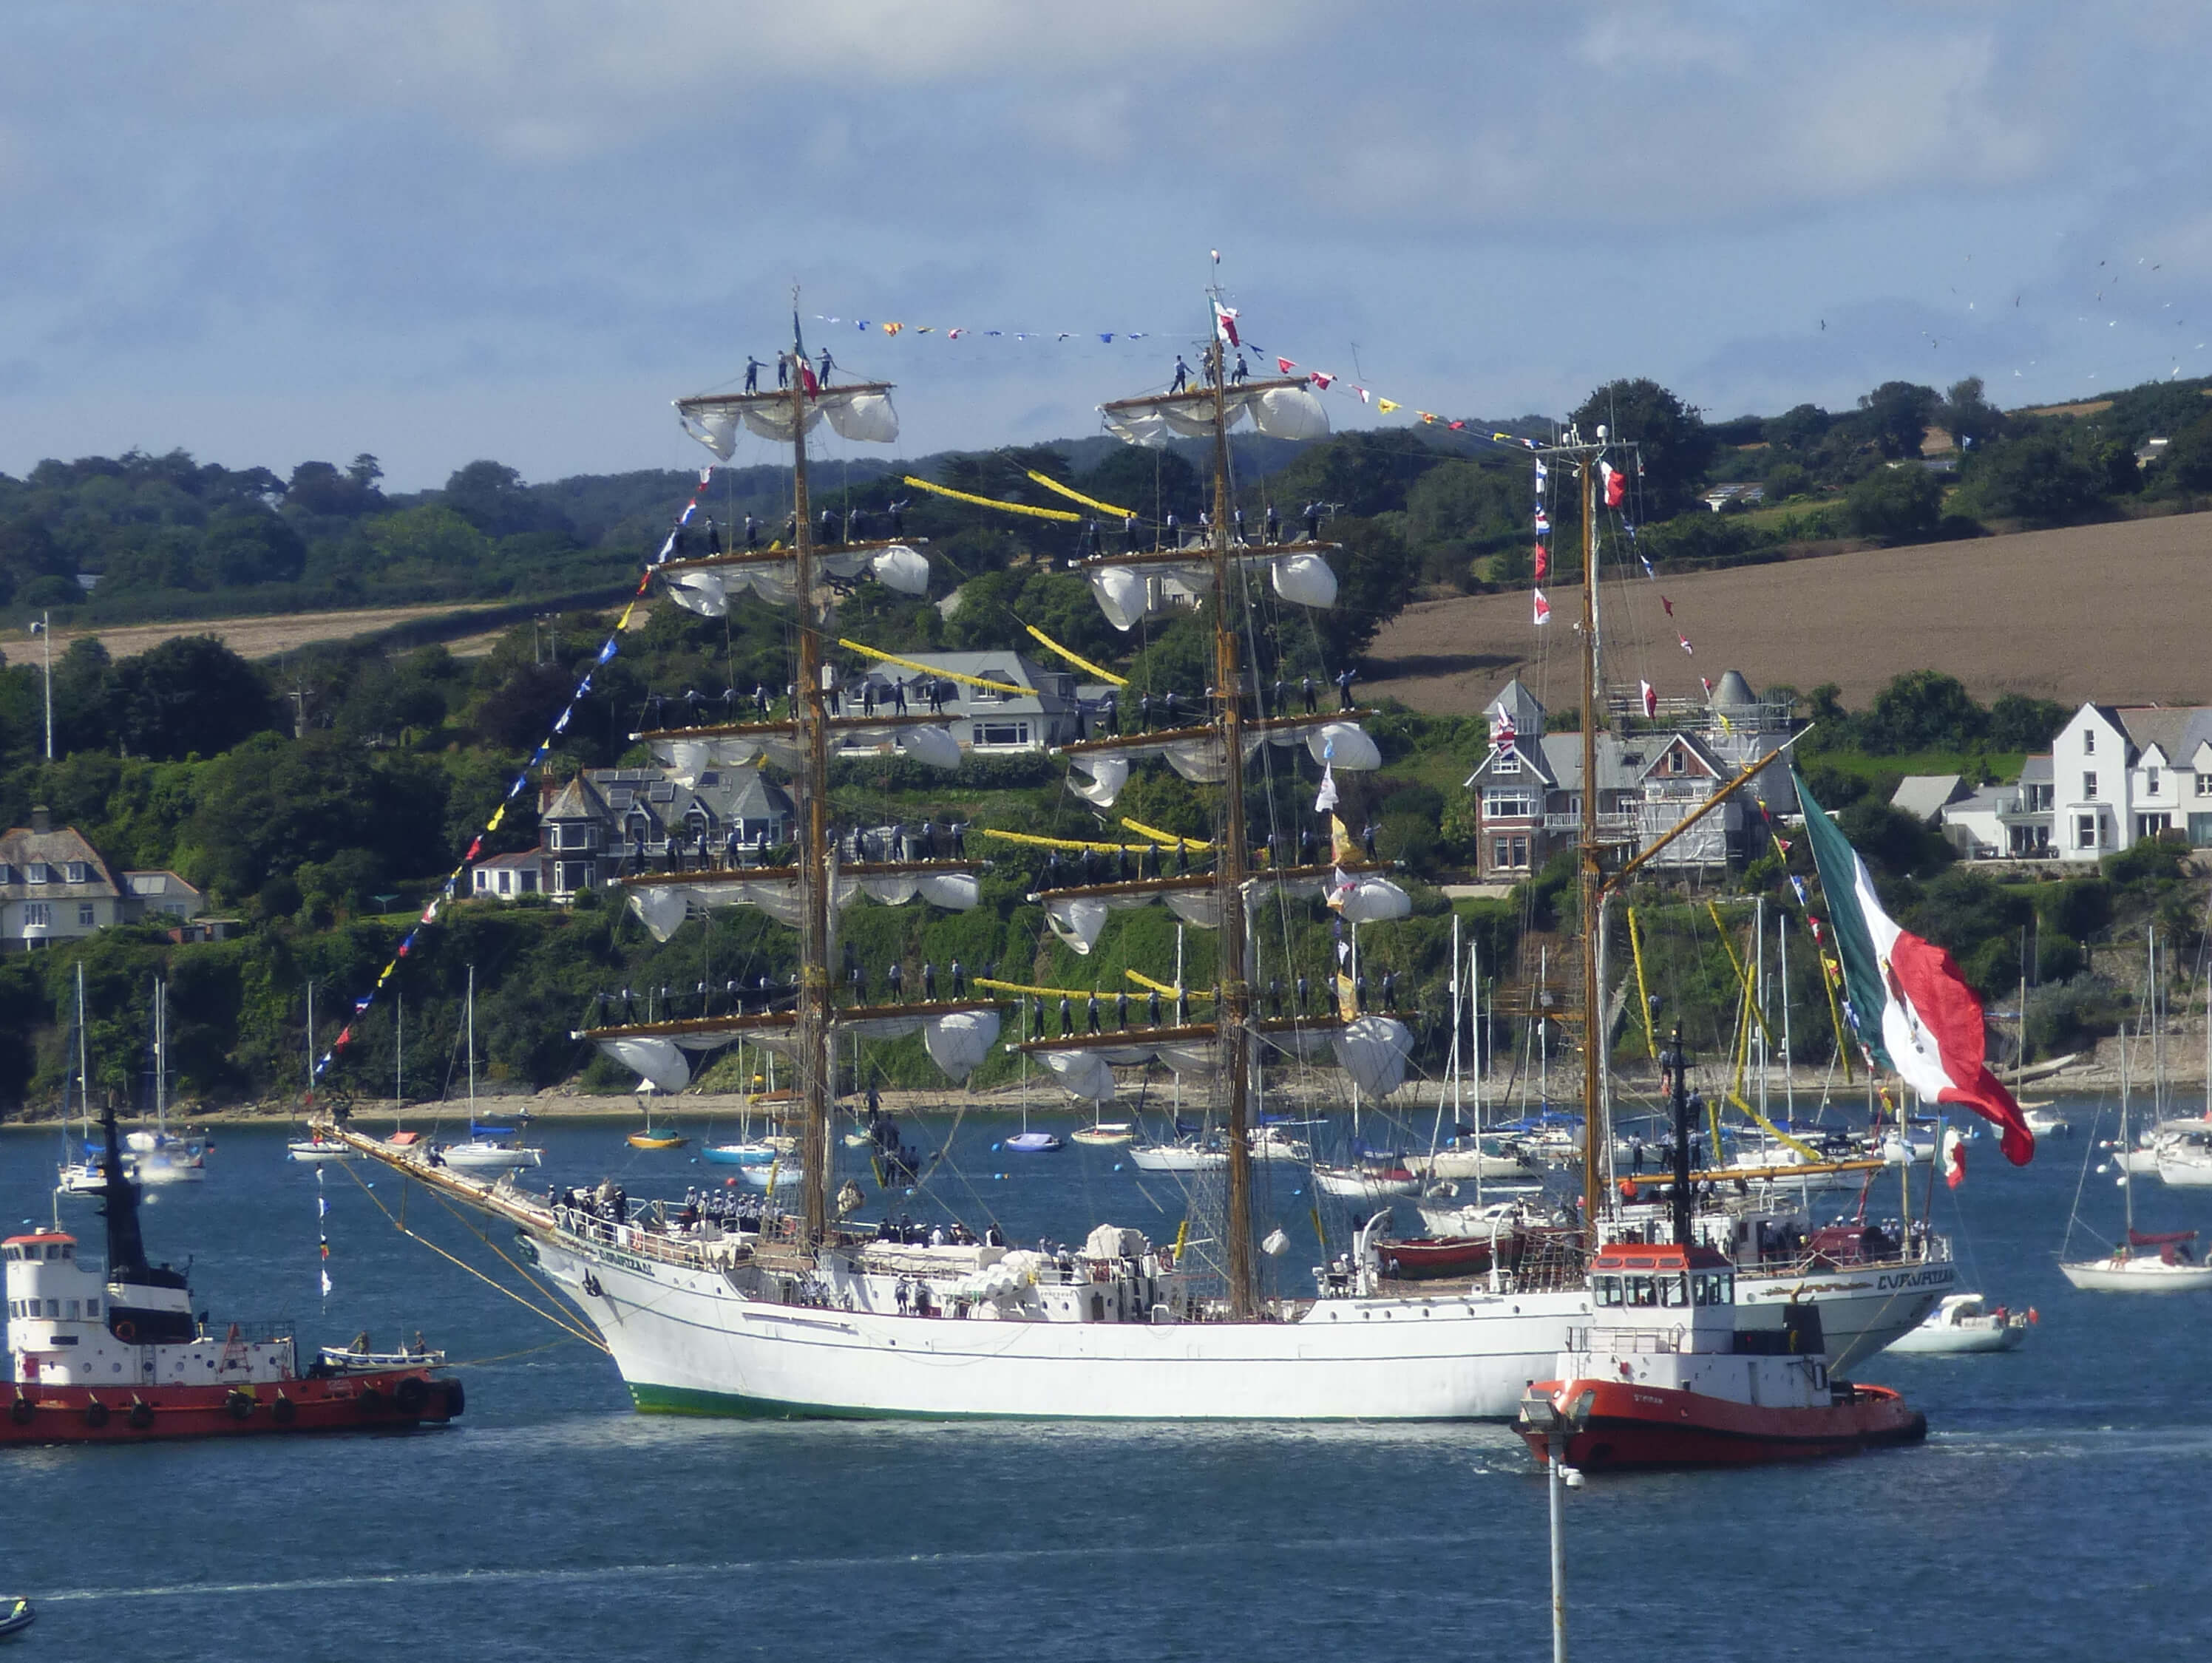 A photo of the Mexican Tall Ship Cuauhtémoc arriving in Falmouth with the crew manning the yards. The photo shows the impressive sight of the ship's crew standing on the yards as the ship sails in.